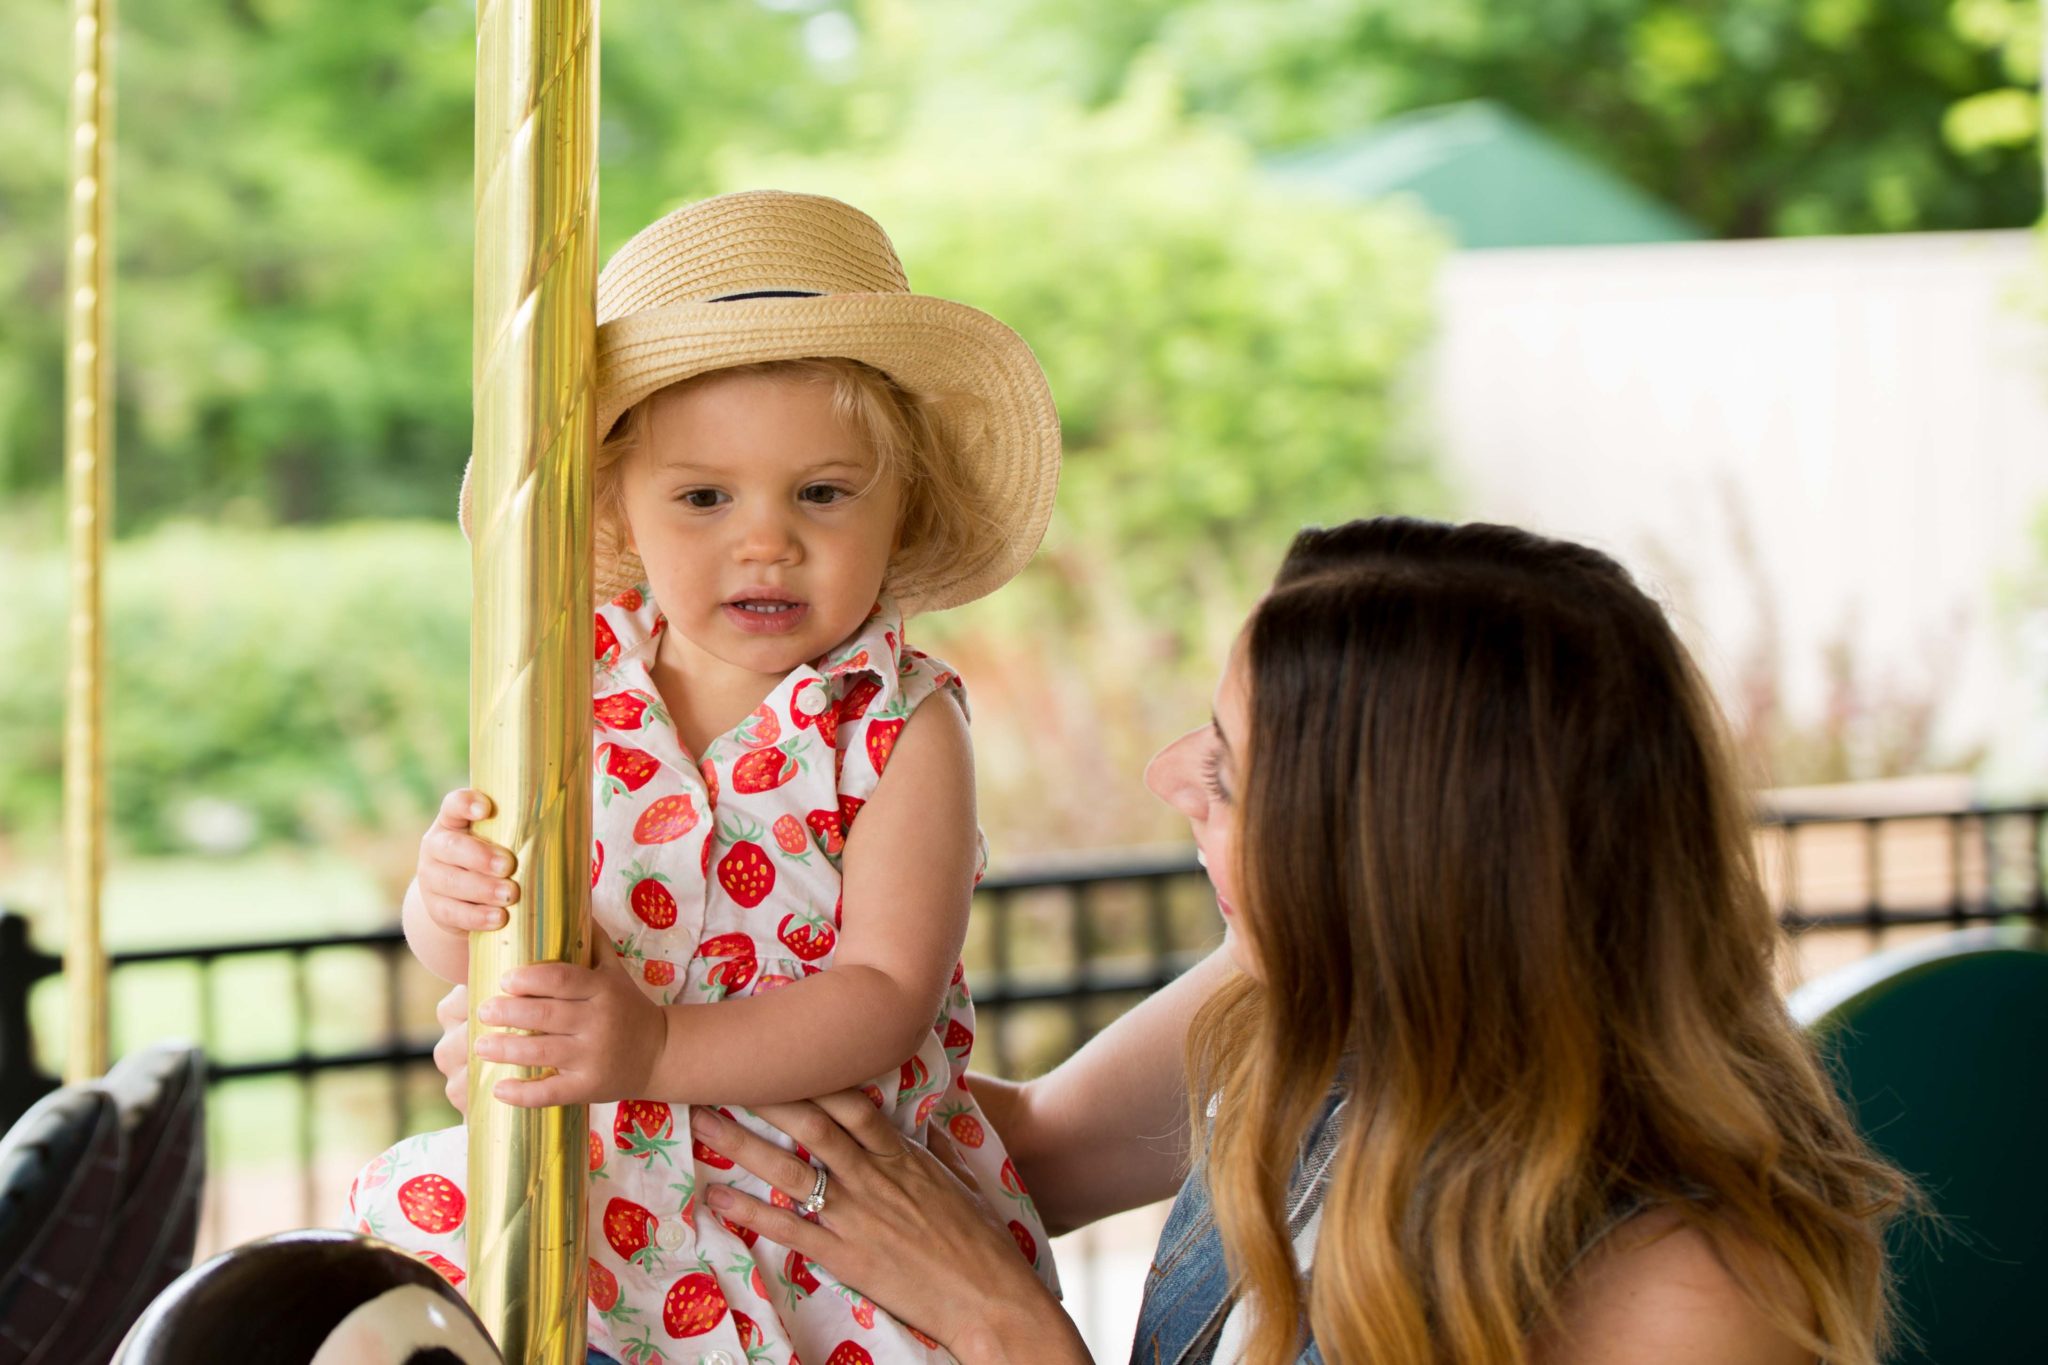 a day at the zoo with thredup | shop secondhand first with thredup | allweareblog.com